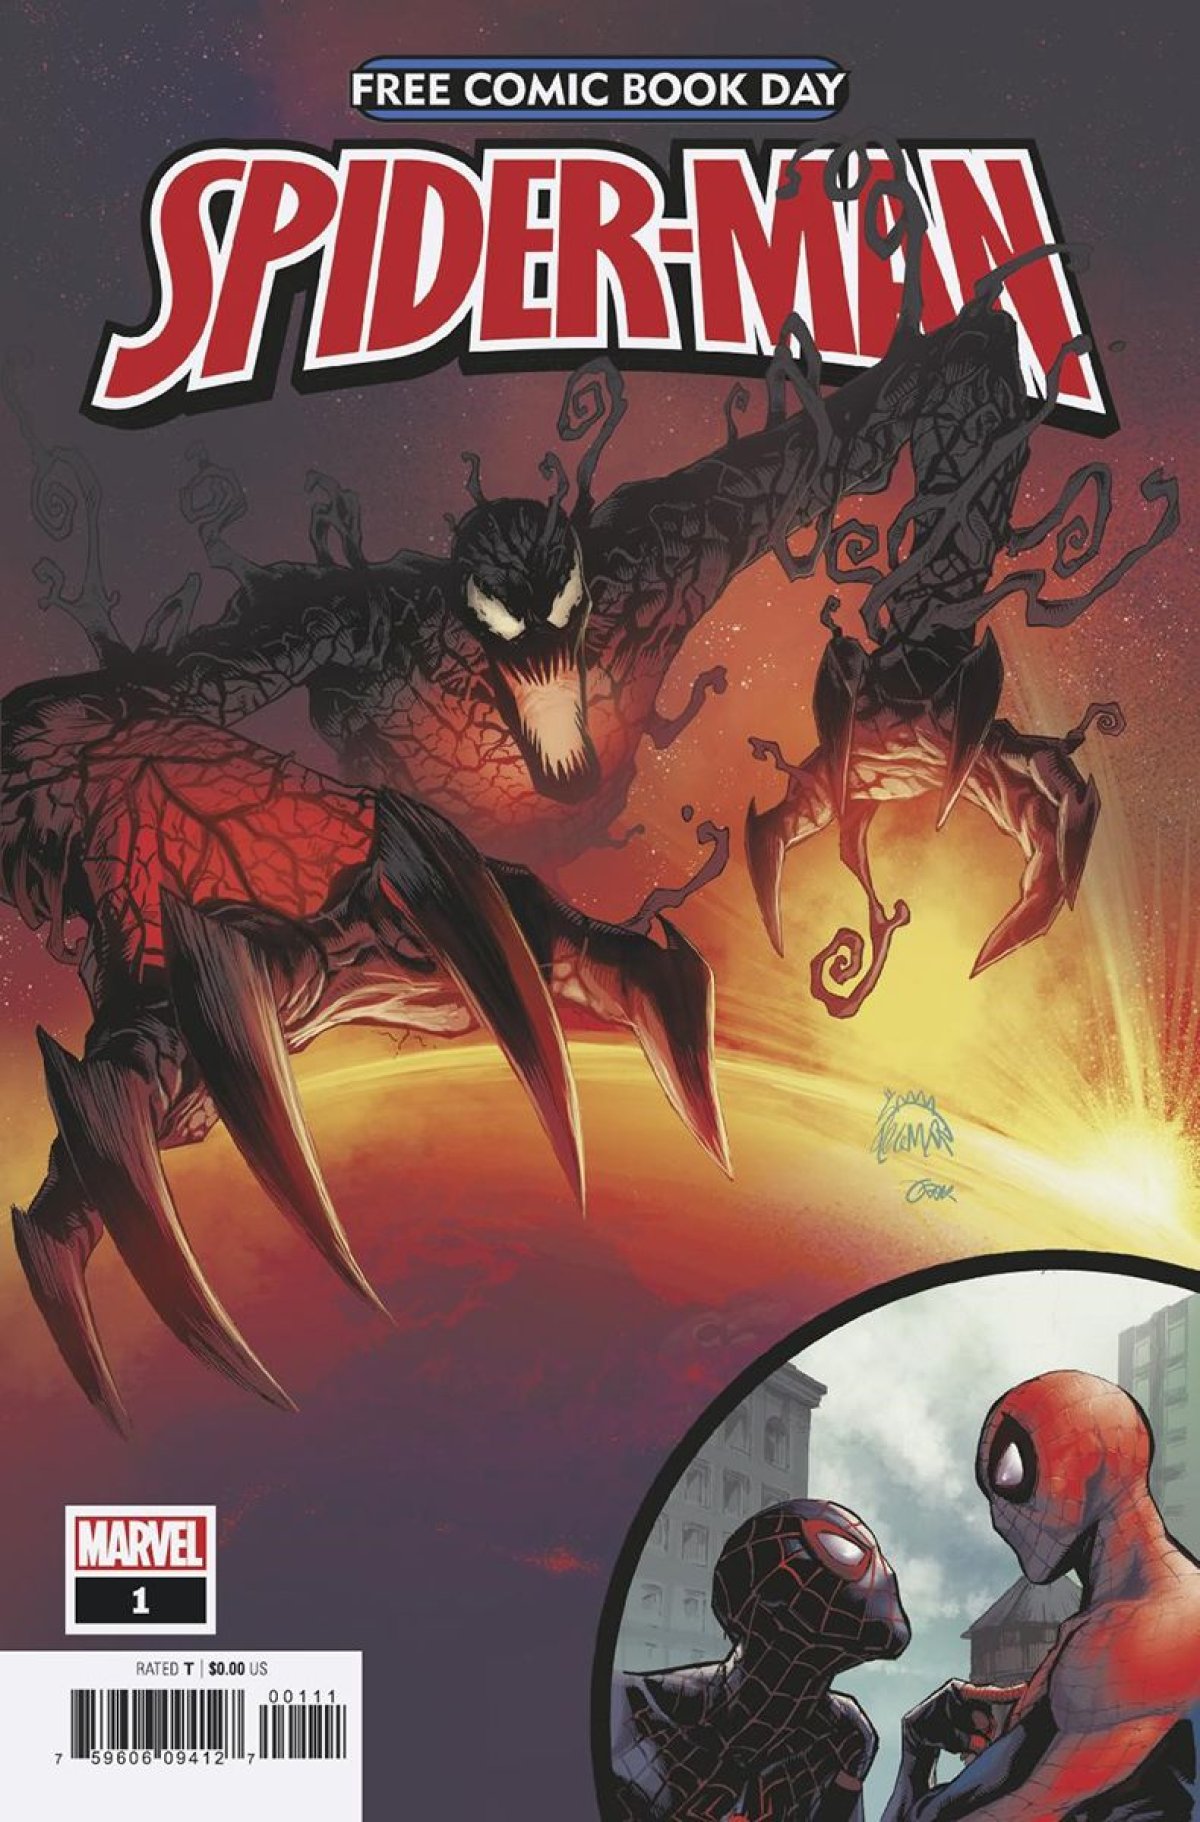 marvel comics spiderman free comic book day 2019 absolute carnage